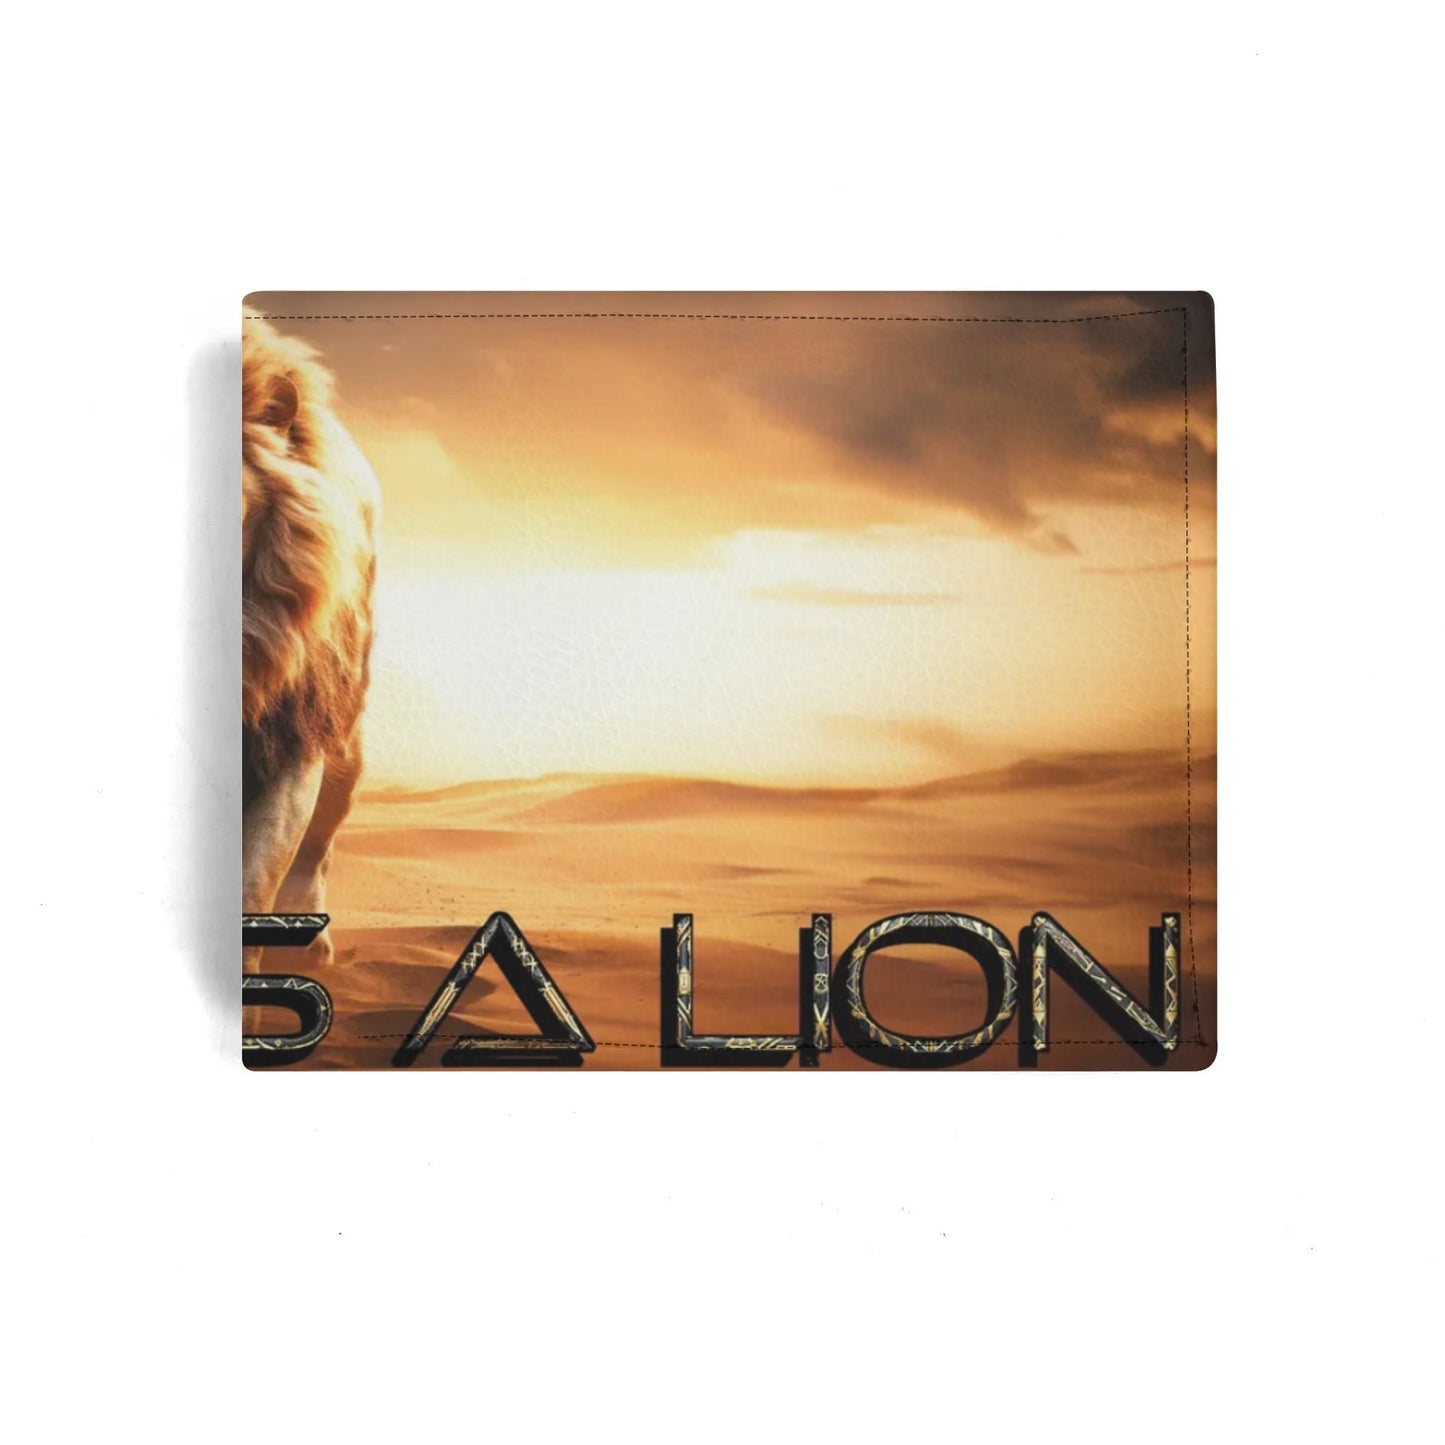 BOLD AS A LION- Mens Minimalist PU Leather Wallet Paper Folded Wallet, FREE SHIPPING